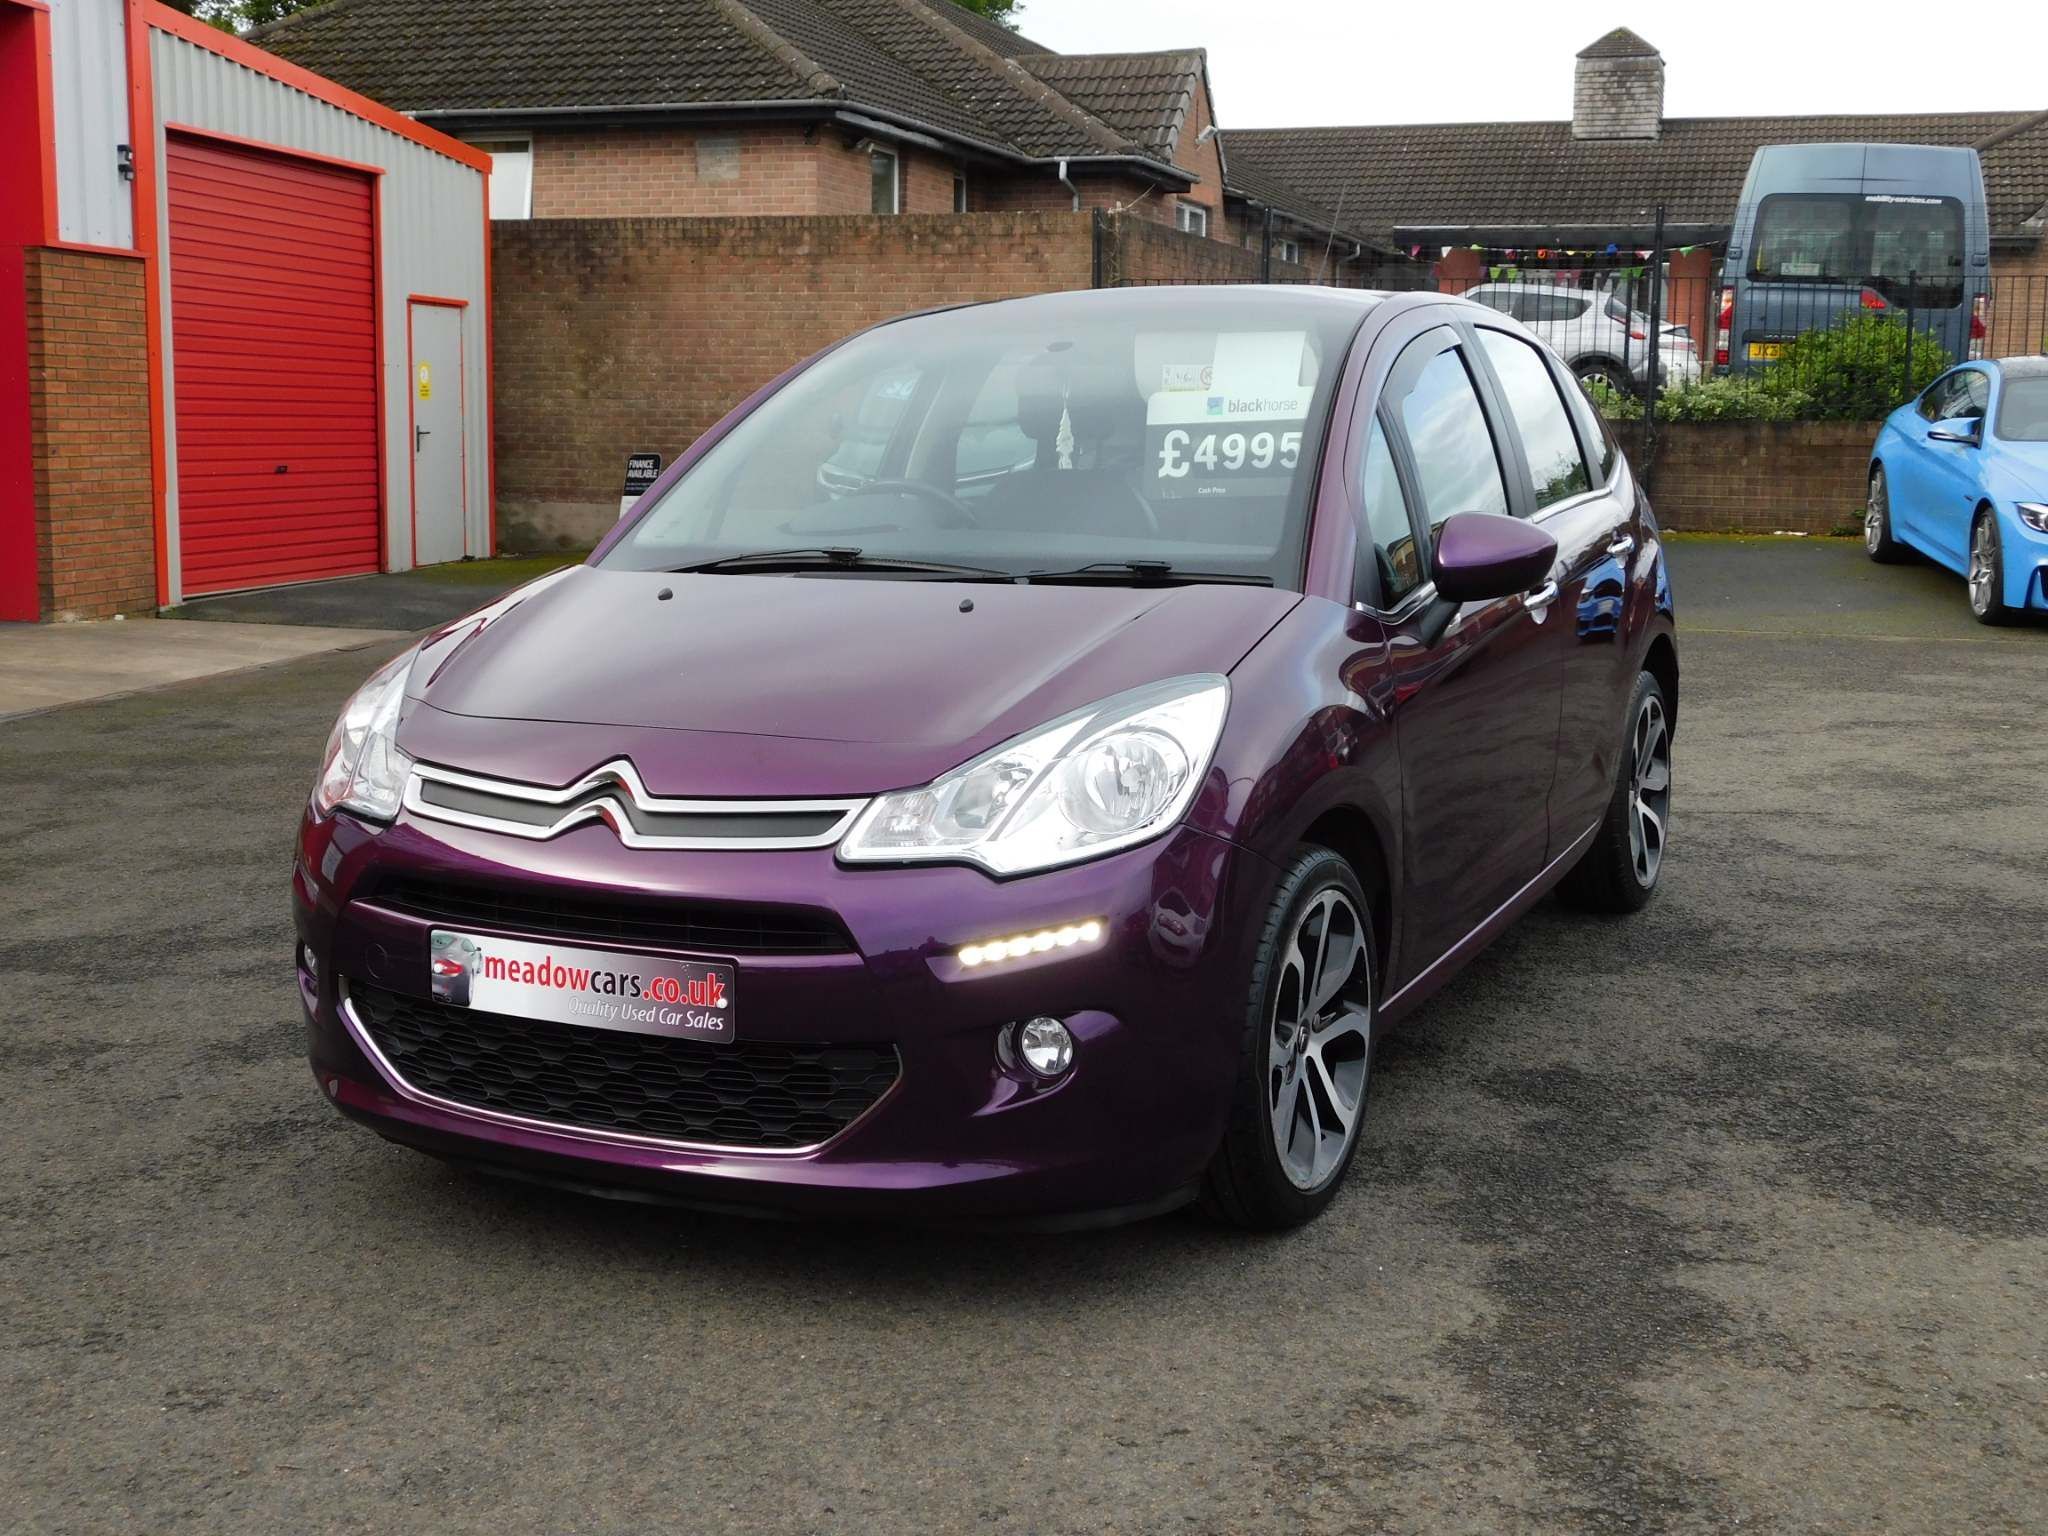 2015 Citroen C3 1.6 eHDi Airdream Selection just arrived